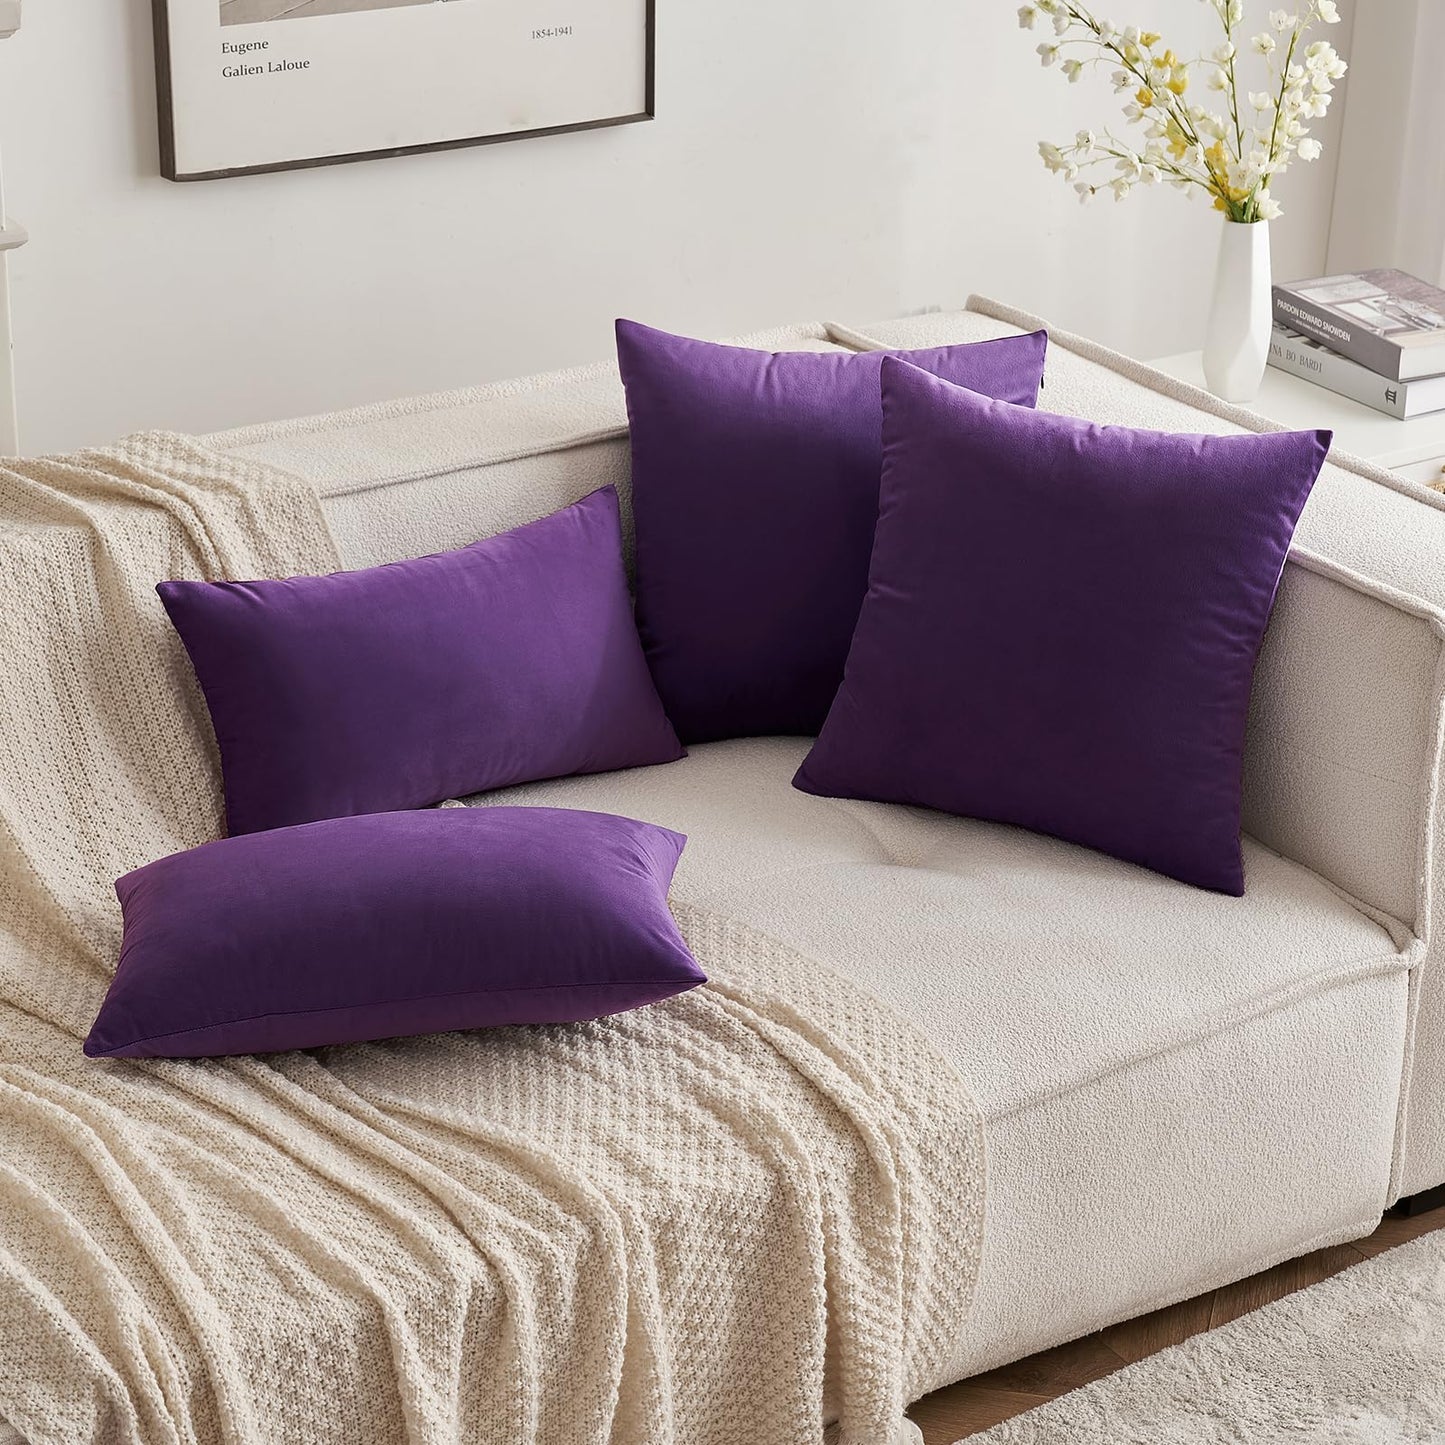 MIULEE Pack of 2 Purple Velvet Throw Pillow Covers 18x18 Inch Soft Solid Decorative Square Set Cushion Cases for Couch Sofa Bedroom